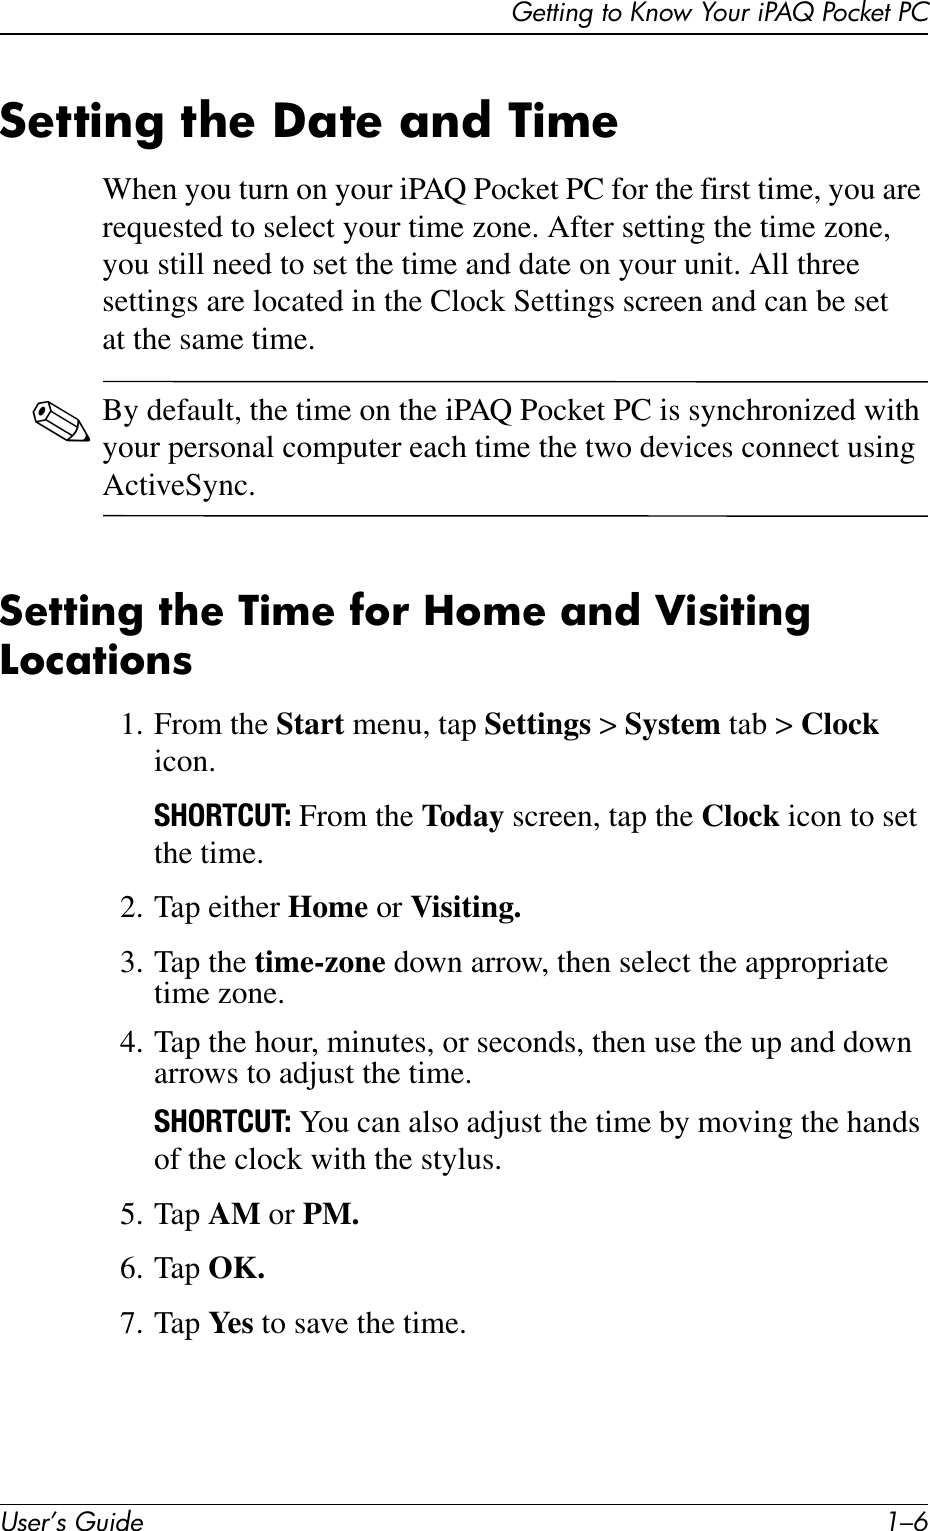 User’s Guide 1–6Getting to Know Your iPAQ Pocket PCSetting the Date and TimeWhen you turn on your iPAQ Pocket PC for the first time, you are requested to select your time zone. After setting the time zone, you still need to set the time and date on your unit. All three settings are located in the Clock Settings screen and can be set at the same time.✎By default, the time on the iPAQ Pocket PC is synchronized with your personal computer each time the two devices connect using ActiveSync.Setting the Time for Home and Visiting Locations1. From the Start menu, tap Settings &gt; System tab &gt; Clock icon.SHORTCUT: From the Today screen, tap the Clock icon to set the time.2. Tap either Home or Visiting.3. Tap the time-zone down arrow, then select the appropriate time zone.4. Tap the hour, minutes, or seconds, then use the up and down arrows to adjust the time.SHORTCUT: You can also adjust the time by moving the hands of the clock with the stylus.5. Tap AM or PM.6. Tap OK.7. Tap Ye s  to save the time.